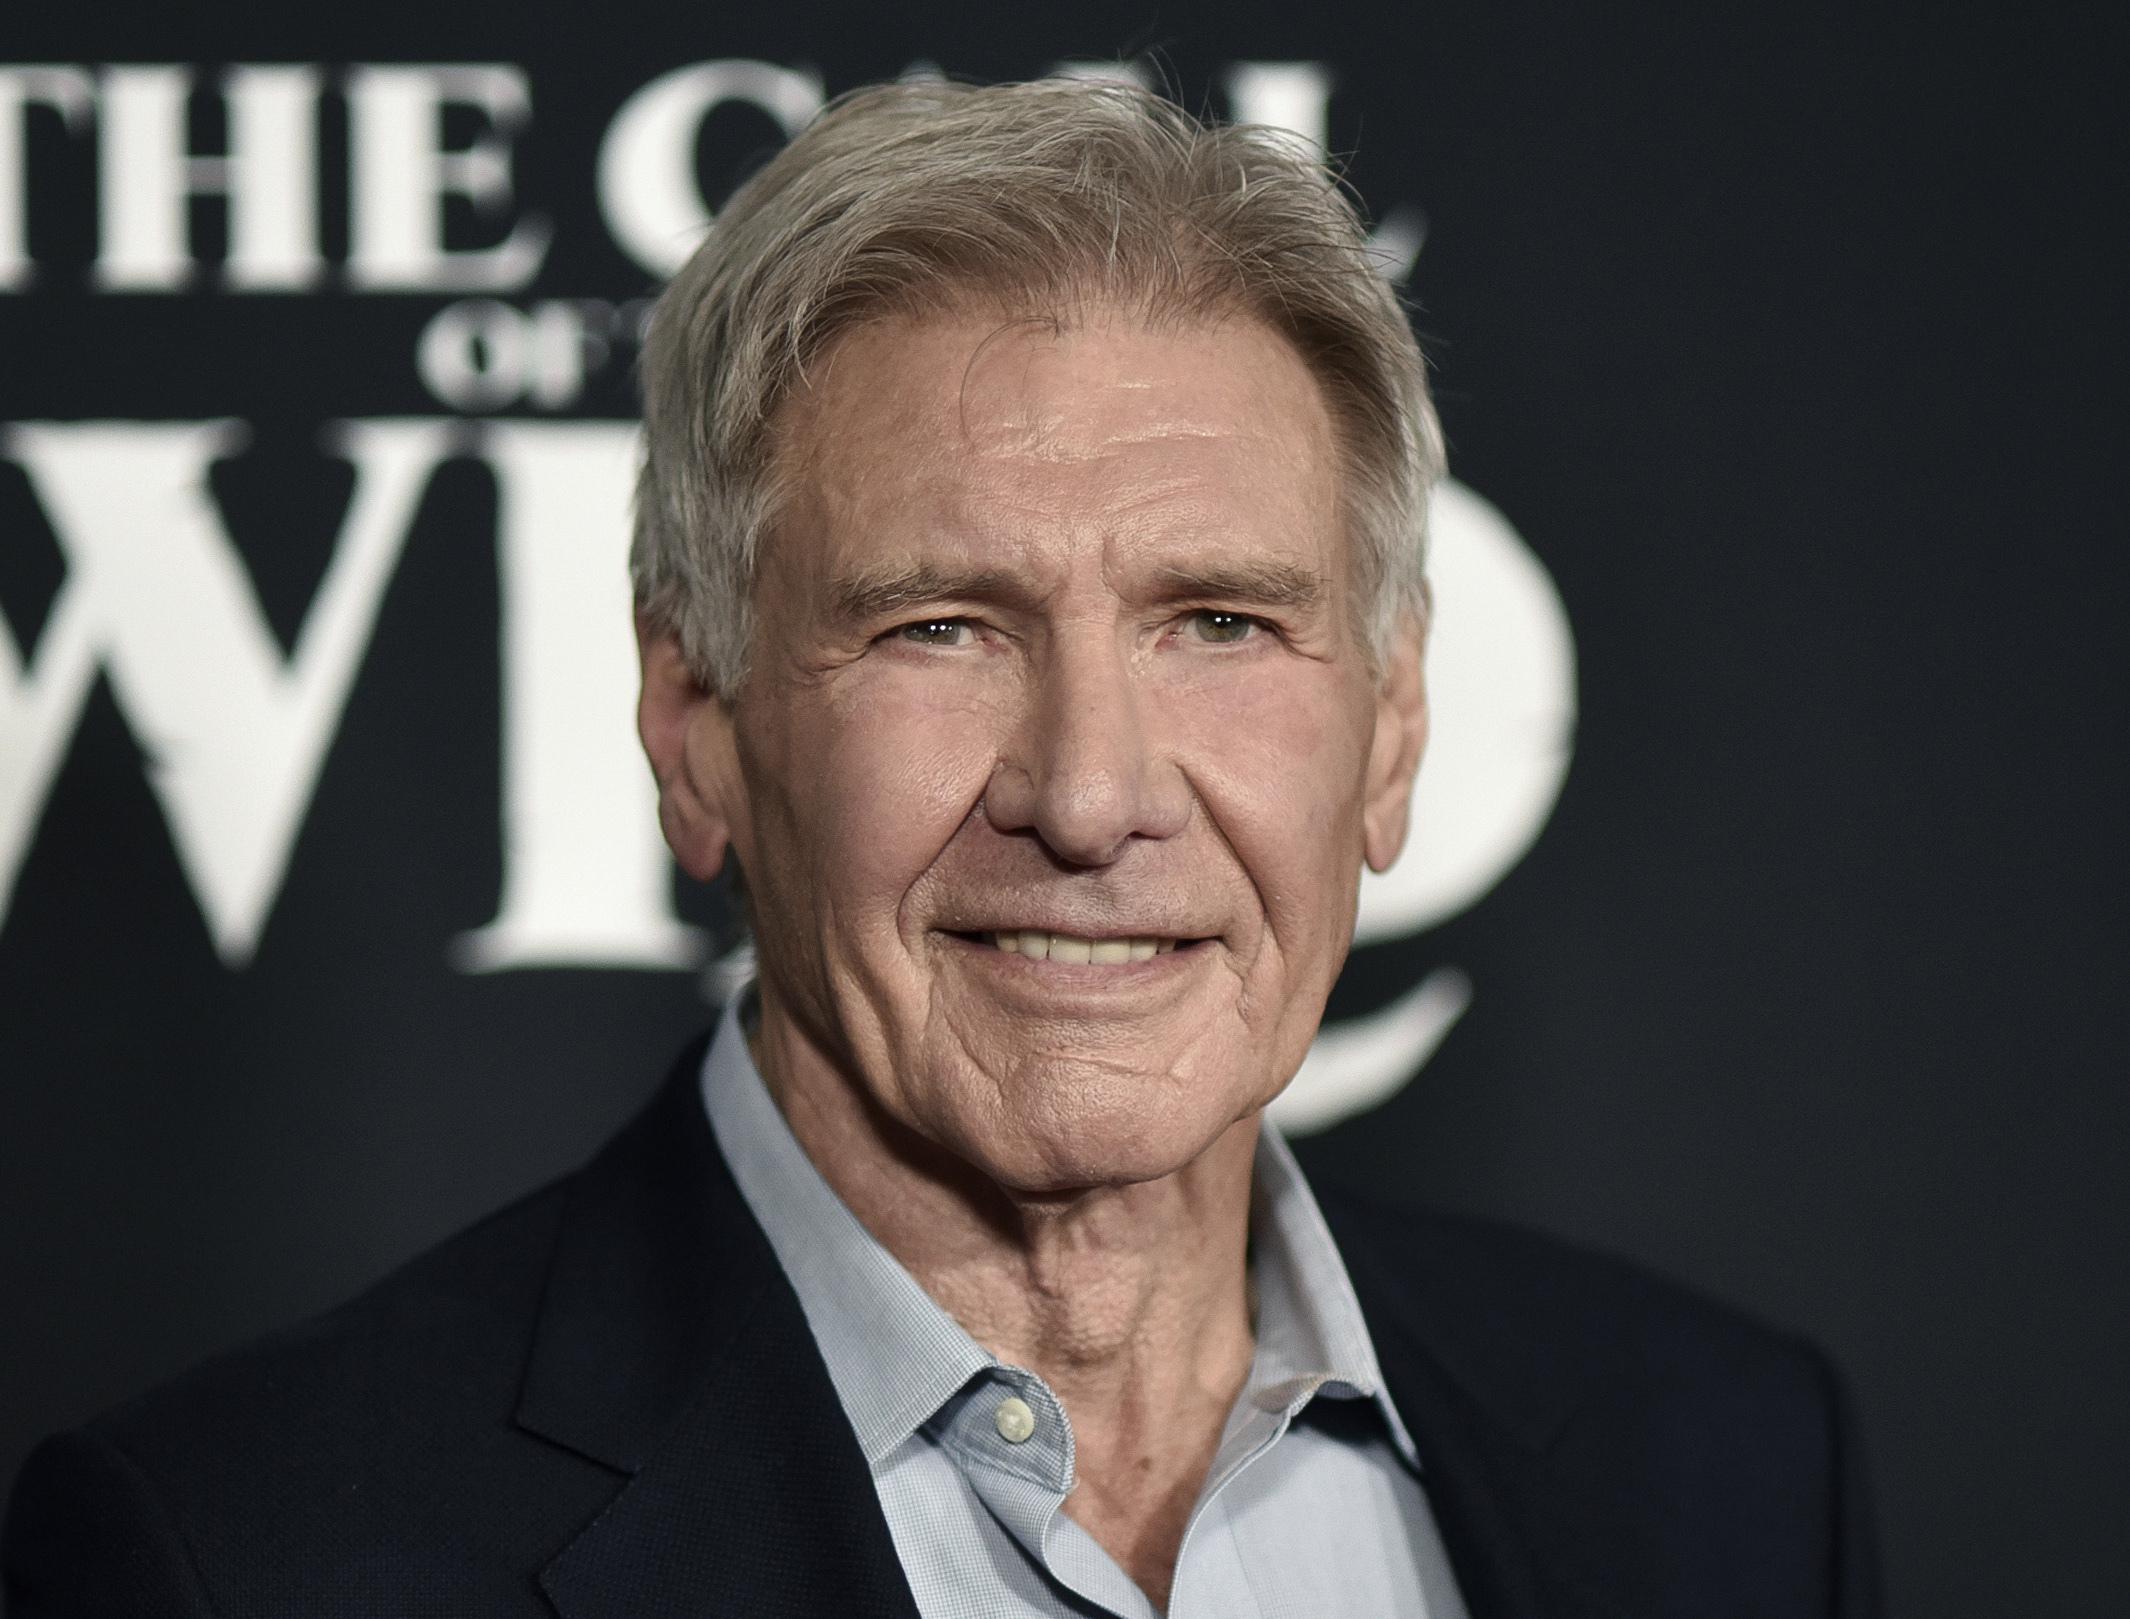 Harrison Ford attends the Cannes Film Festival premiere of the new